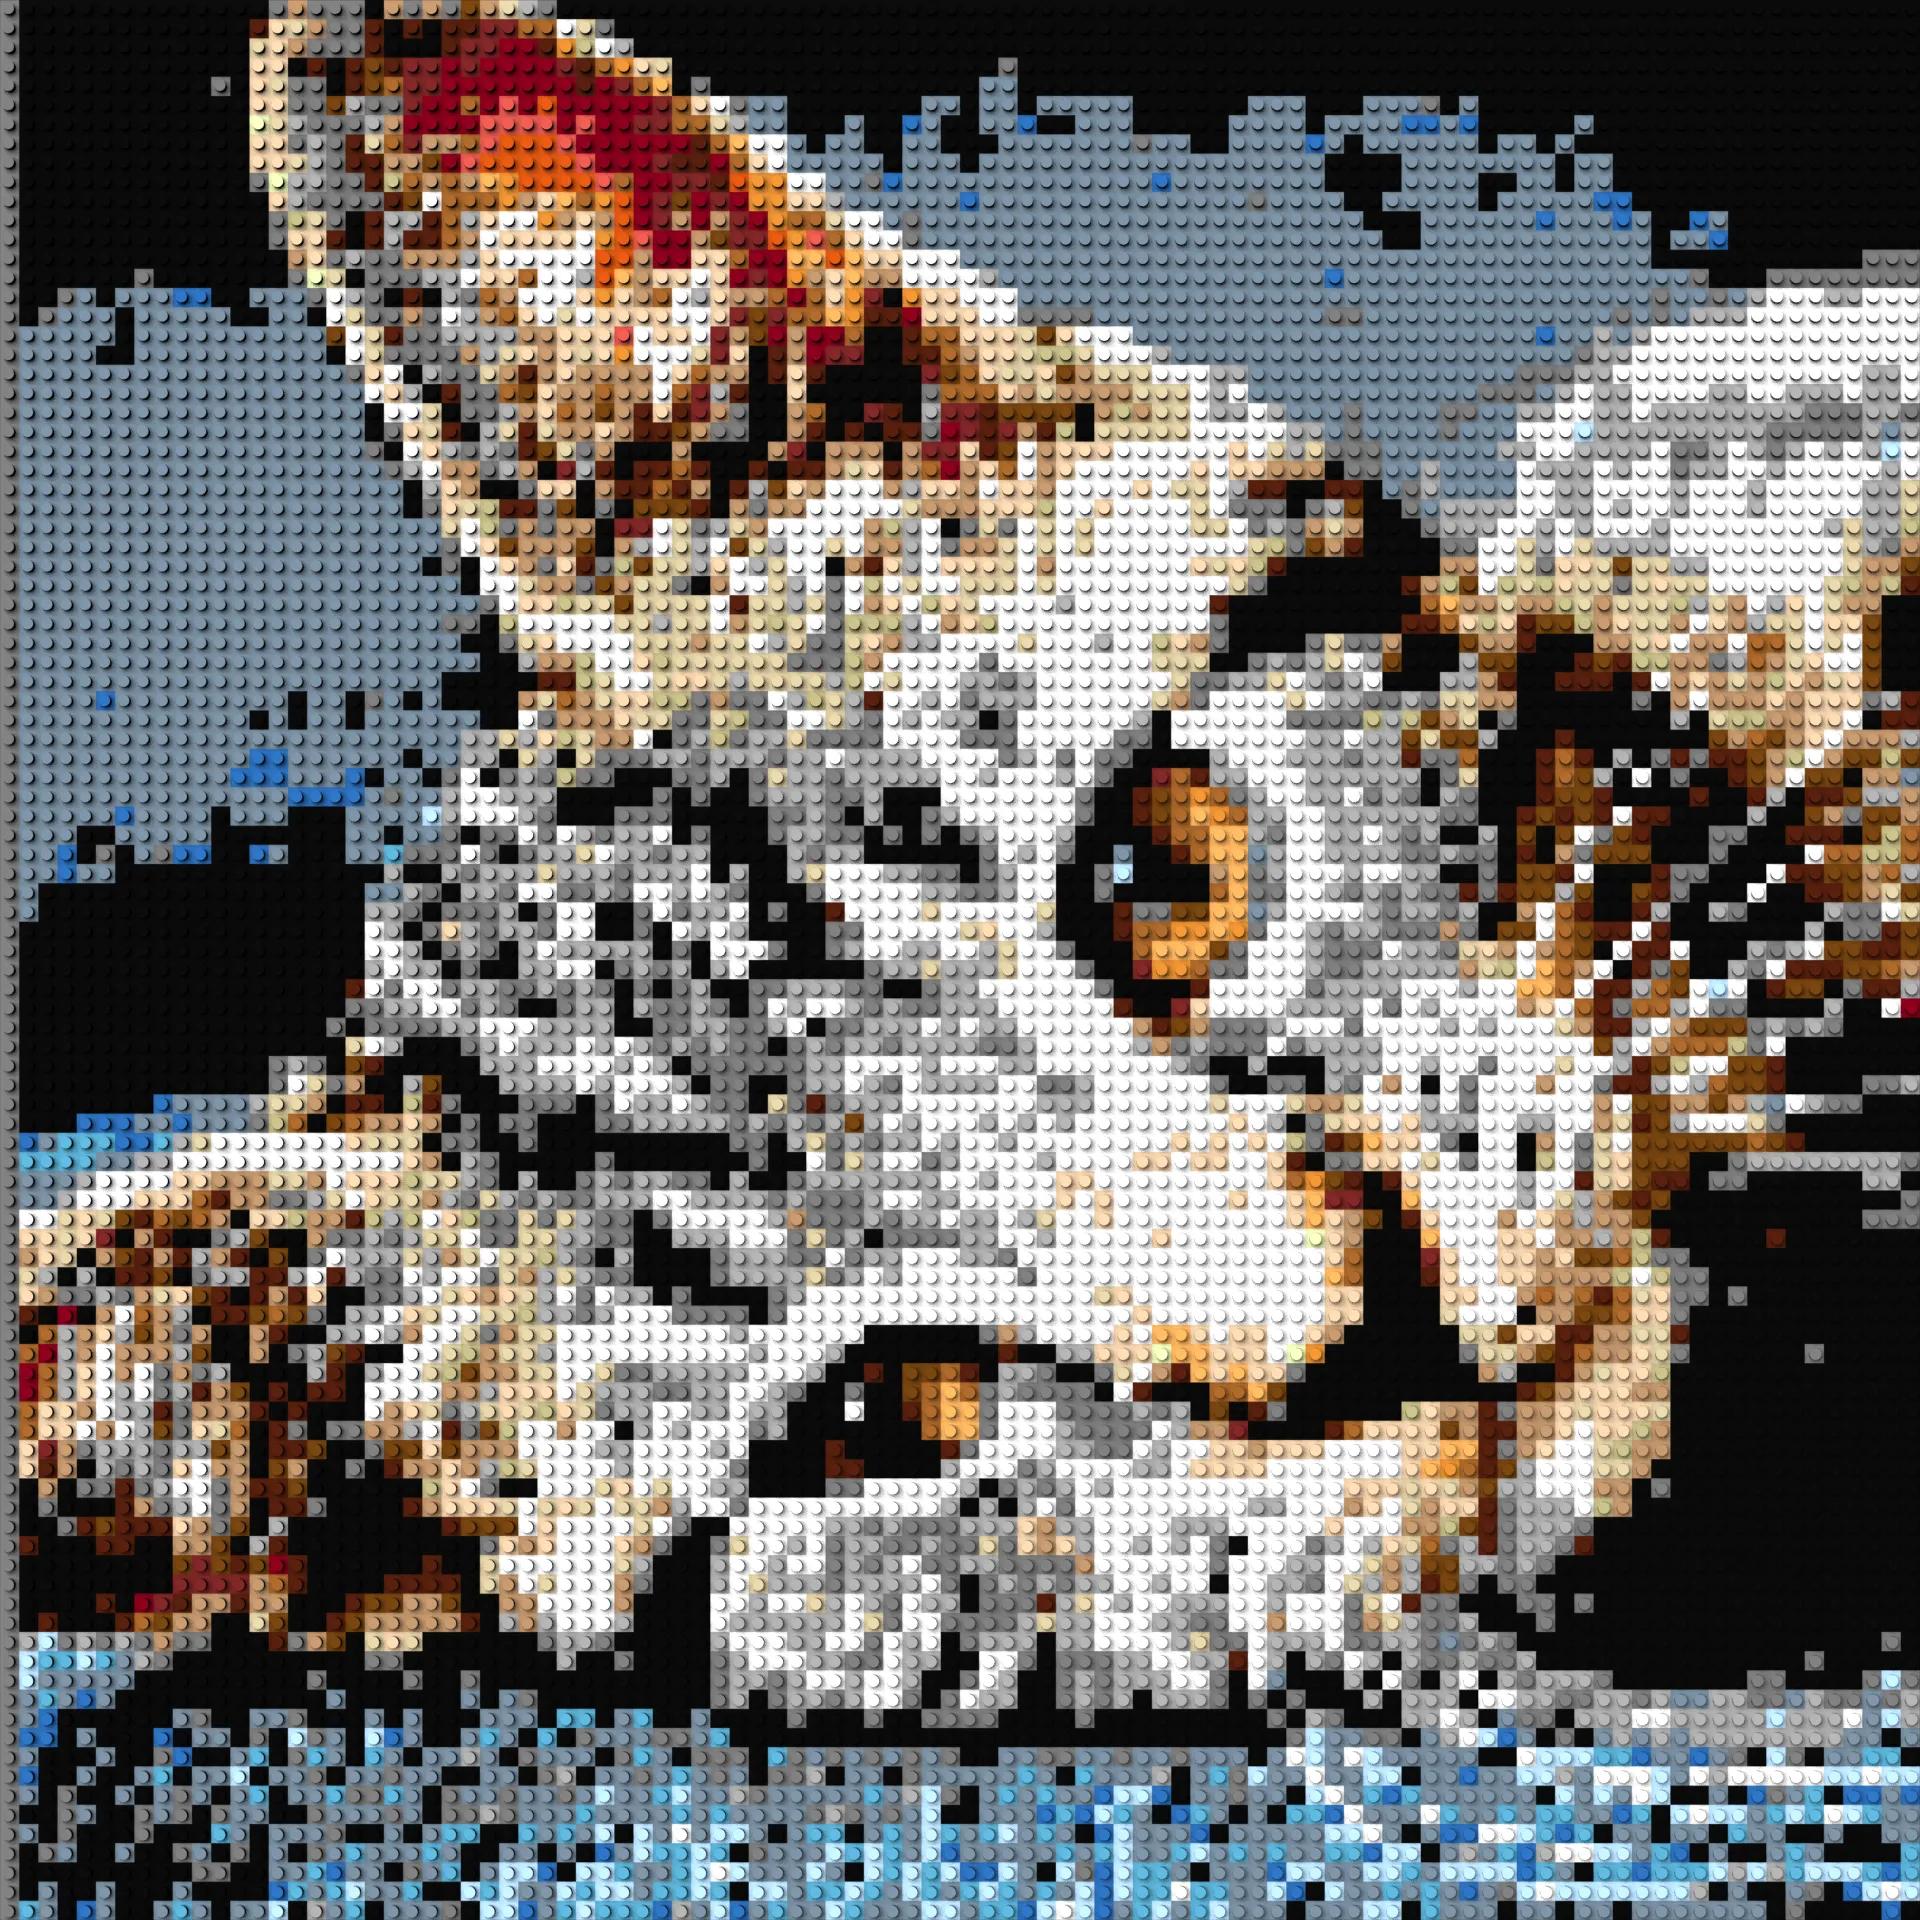 Cat converted to a brick Mosaic